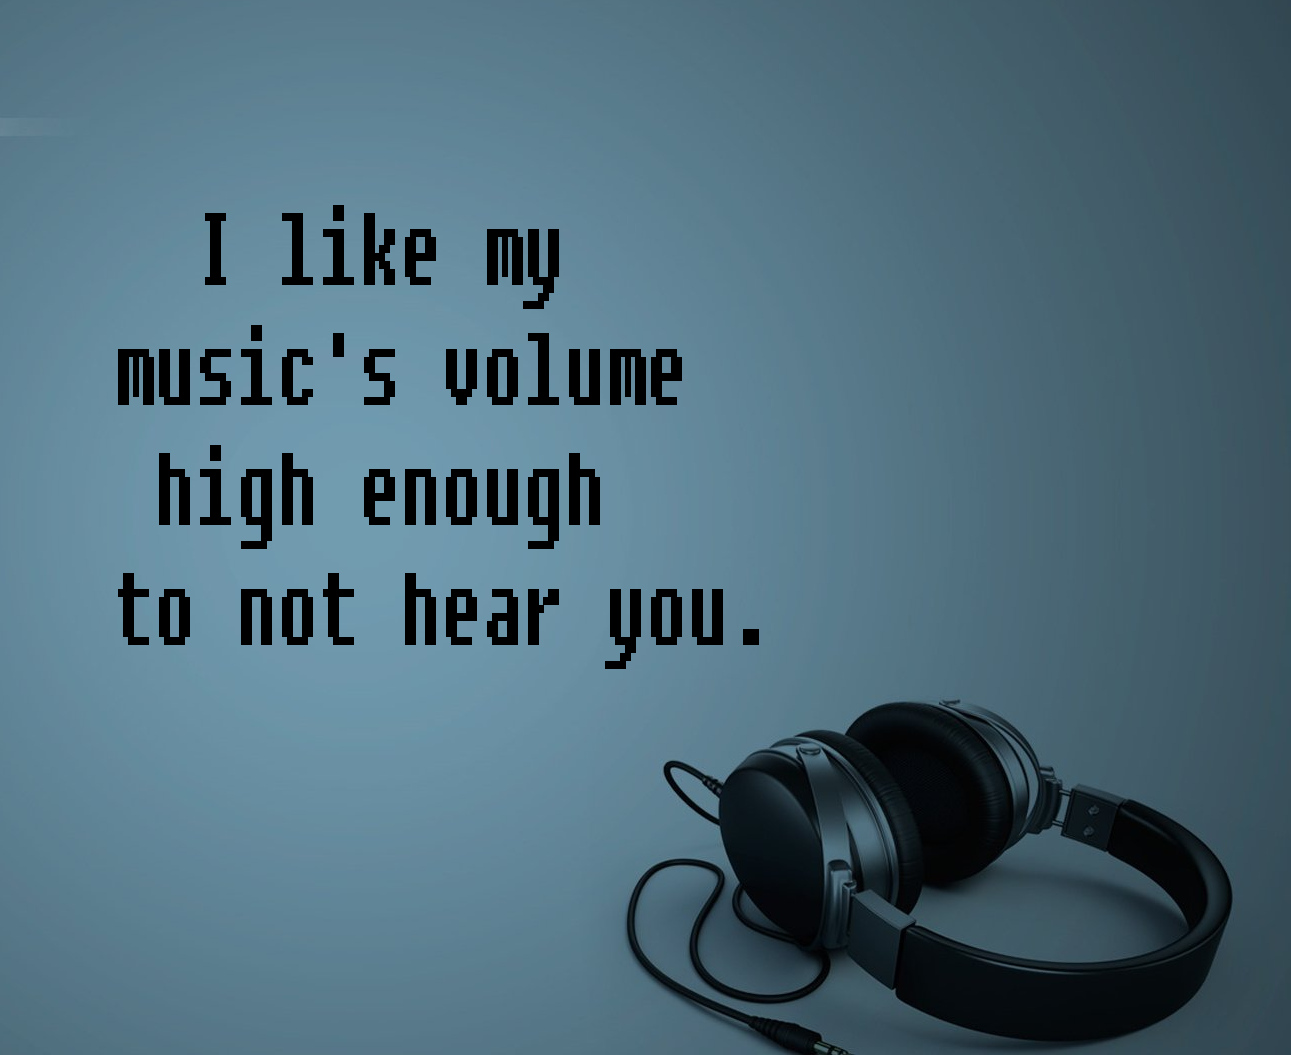 I like my music’s volume high enough to not hear you